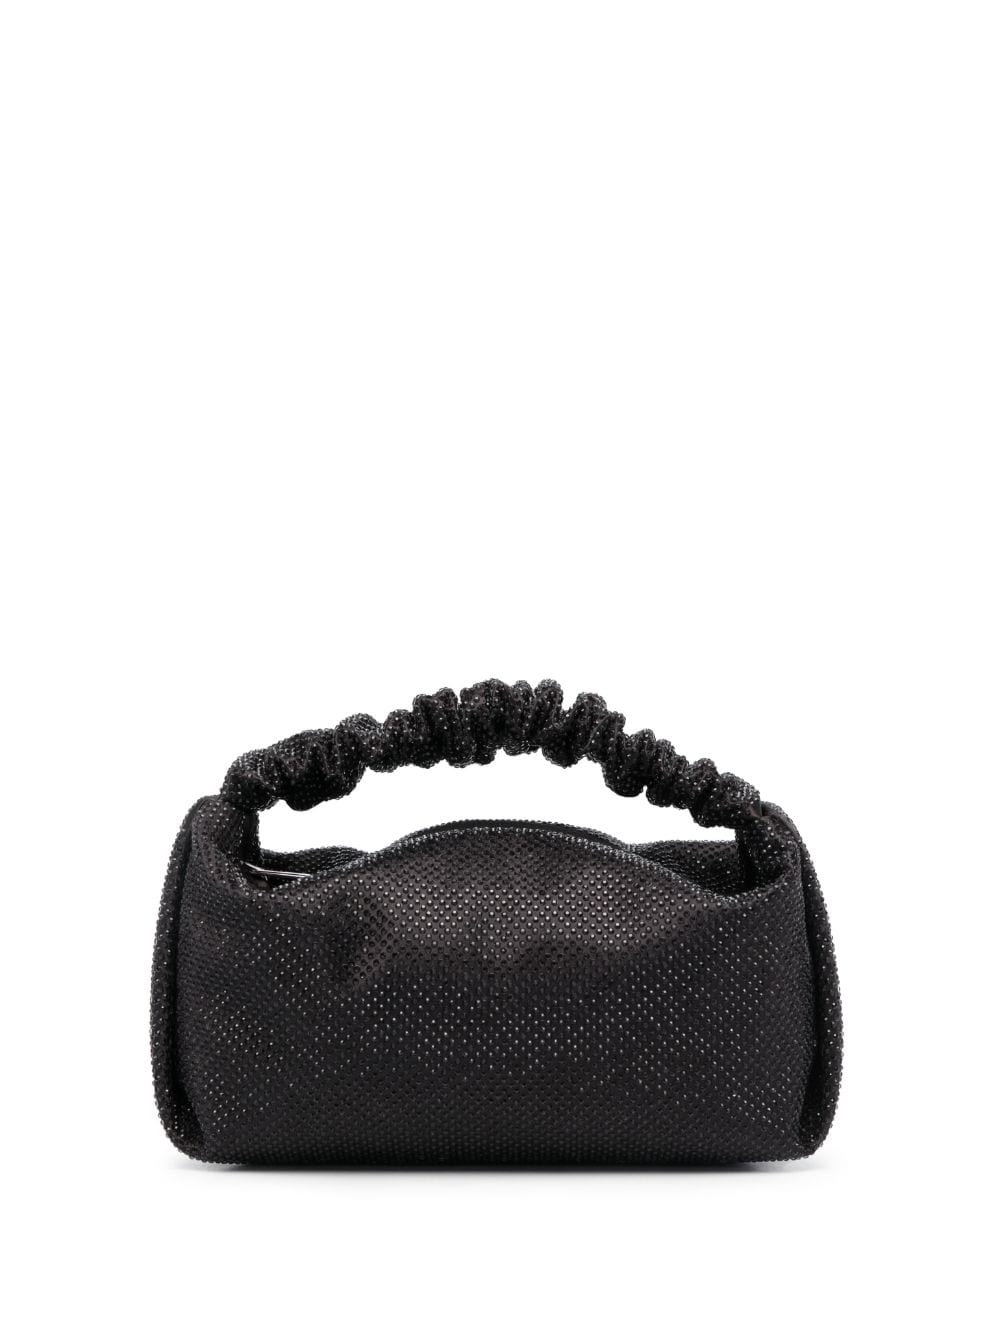 ALEXANDER WANG Crystal-Spark Mini Clutch with Ruched Detailing in Black